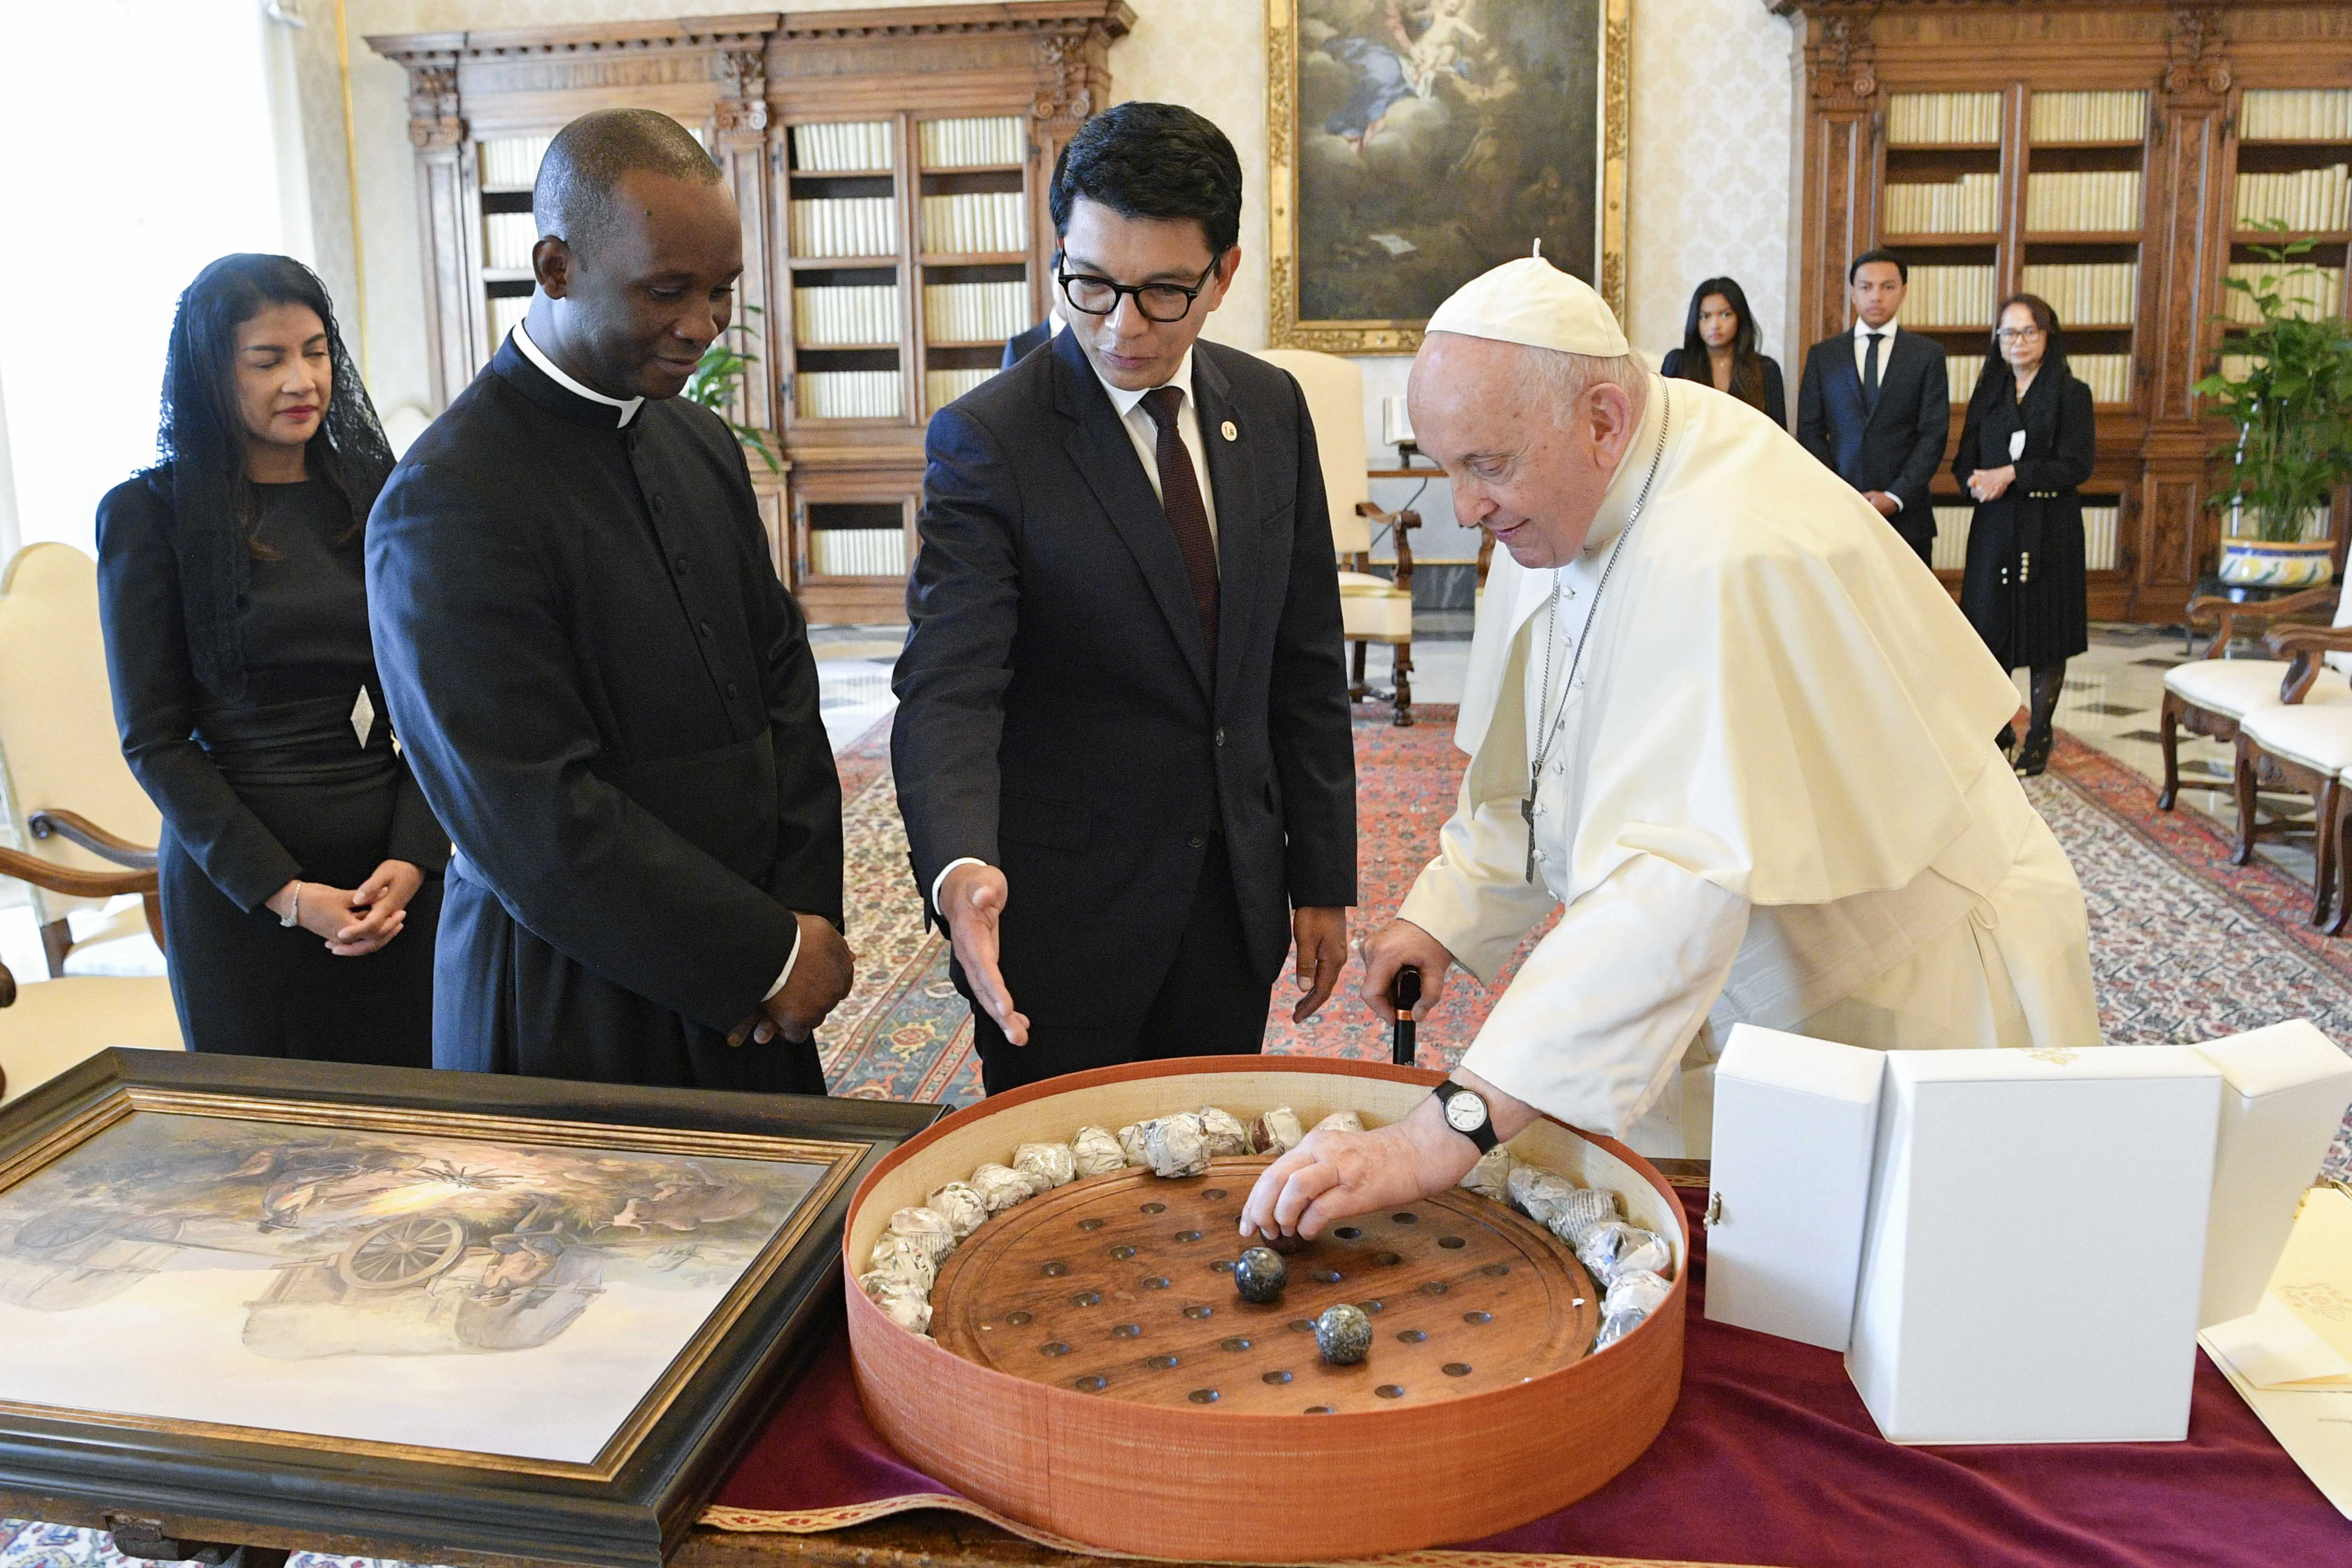 Madagascar's President Andry Nirina Rajoelina gave Pope Francis a solitaire game with marbles made from local Madagascar stones during a meeting at the Vatican Aug. 17, 2023. Vatican Media.